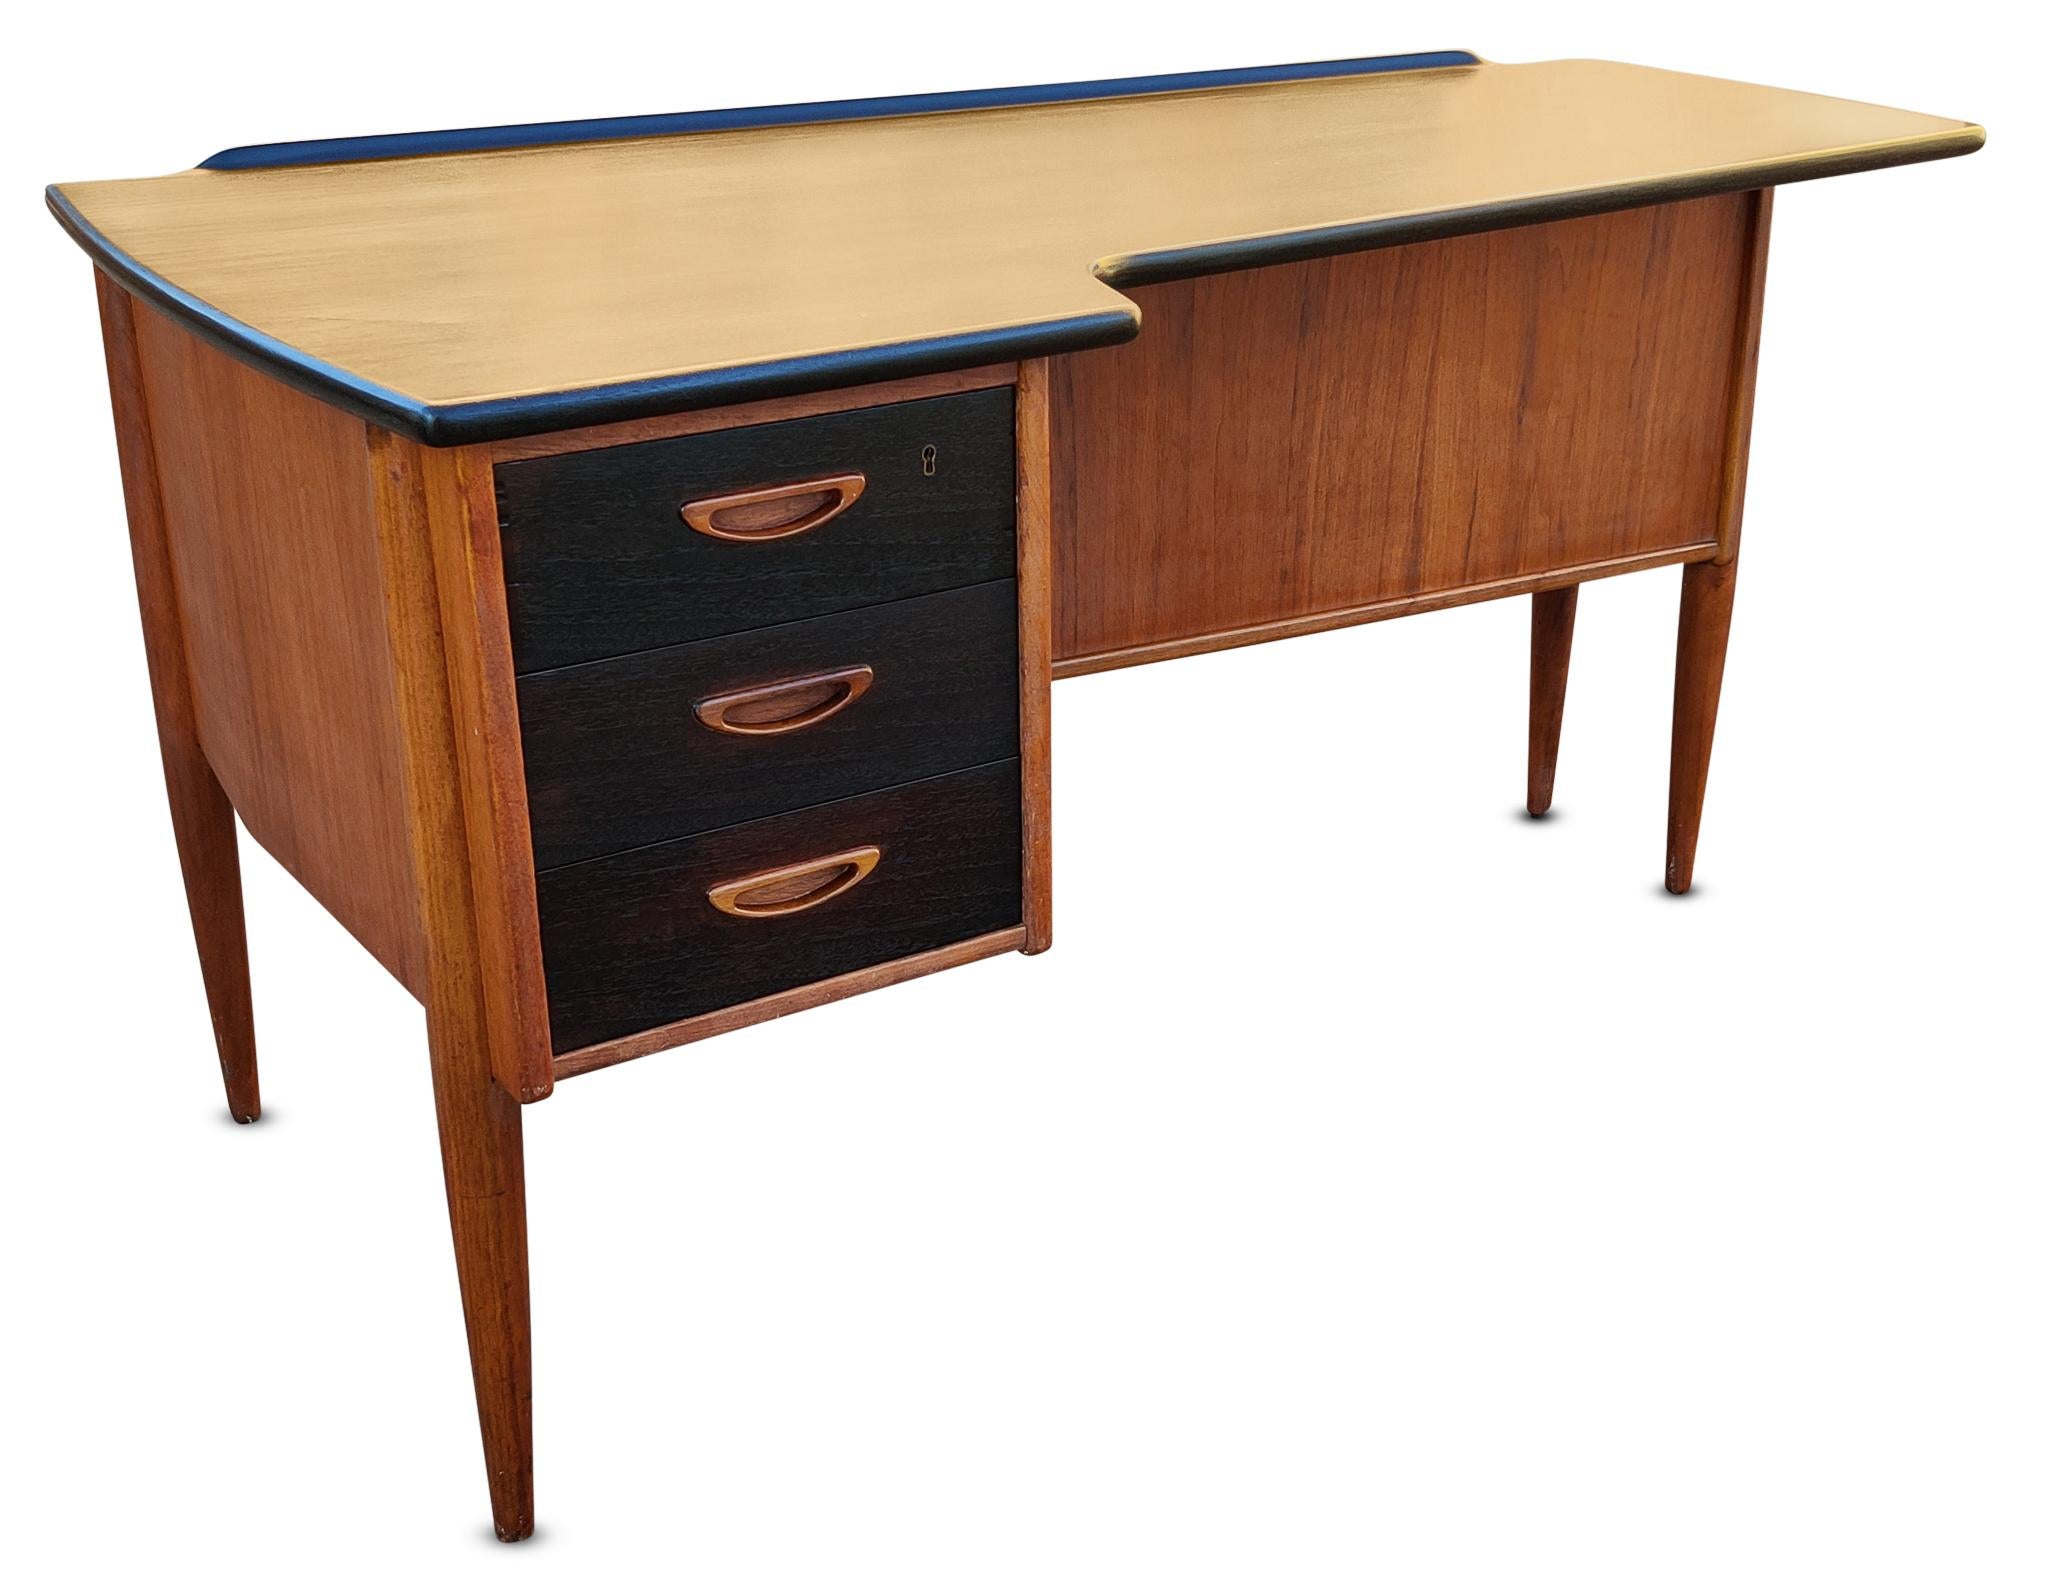 Desk, Denmark, circa 1960s. Designed by Peter Lovig Nielsen, this model is known as the Boomerang Desk because of its slightly curved top. Our model is constructed of oiled teak with Jacobian stained top and drawerfronts. Notice the carved and inset